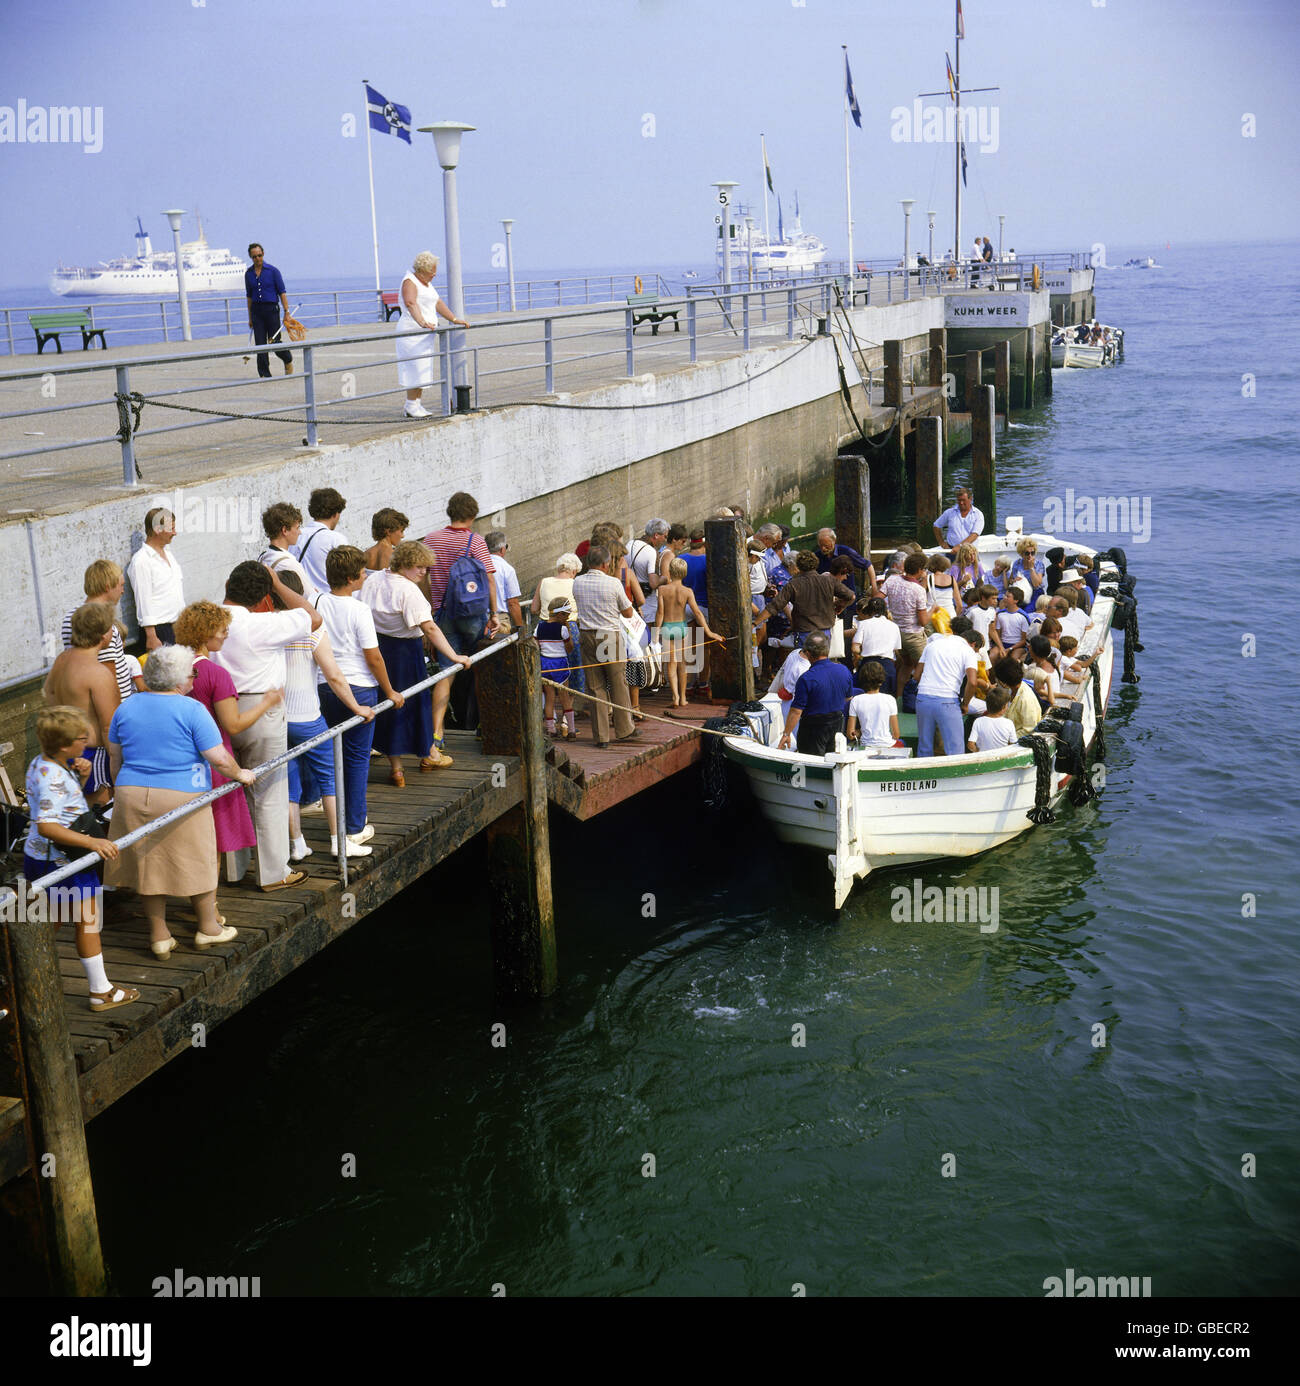 tourism, tourists during boarding of a tourist boat, pier, Heligoland, Germany, 1990s, 90s, 20th century, historic, historical, line of people, waiting line, landing stage, boat bridge, marina, marinas, North Sea, Central Europe, navigation, excursion, boat trip, Additional-Rights-Clearences-Not Available Stock Photo